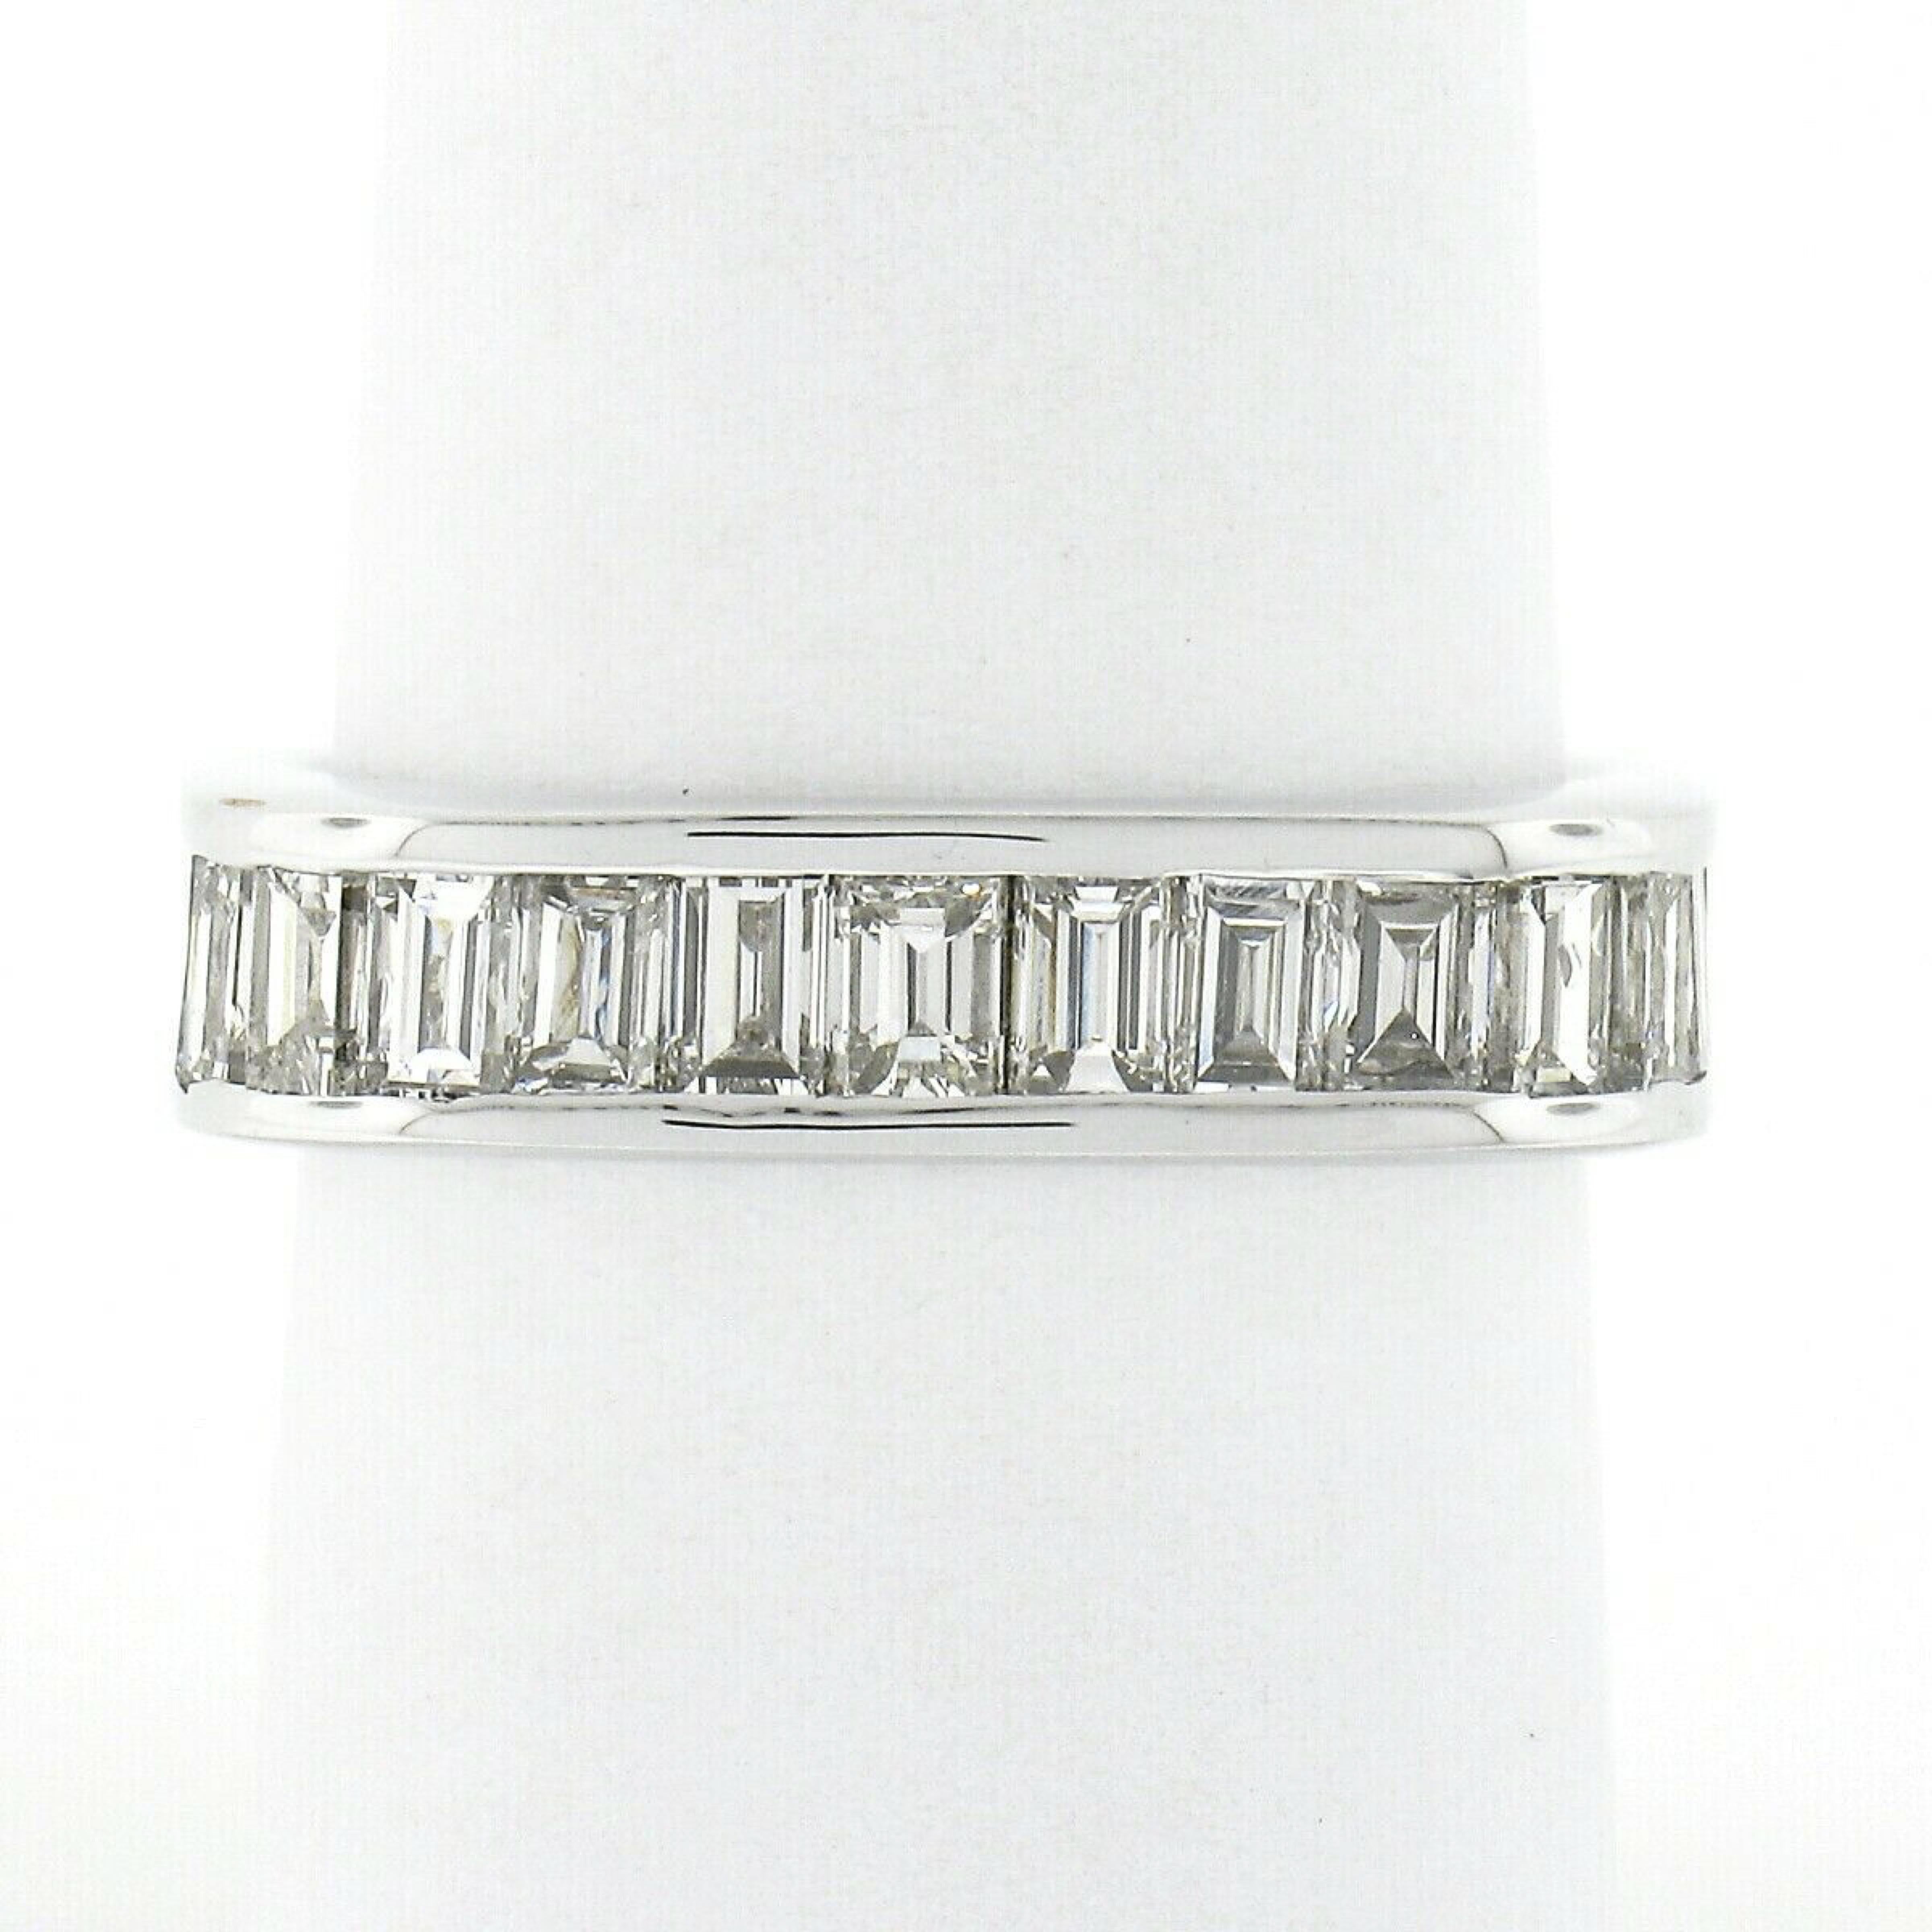 This absolutely stunning and very well made diamond eternity band is crafted in solid 18k white gold and features very fine quality straight baguette cut diamonds neatly channel set entirely throughout the squared design. The ring contains 34